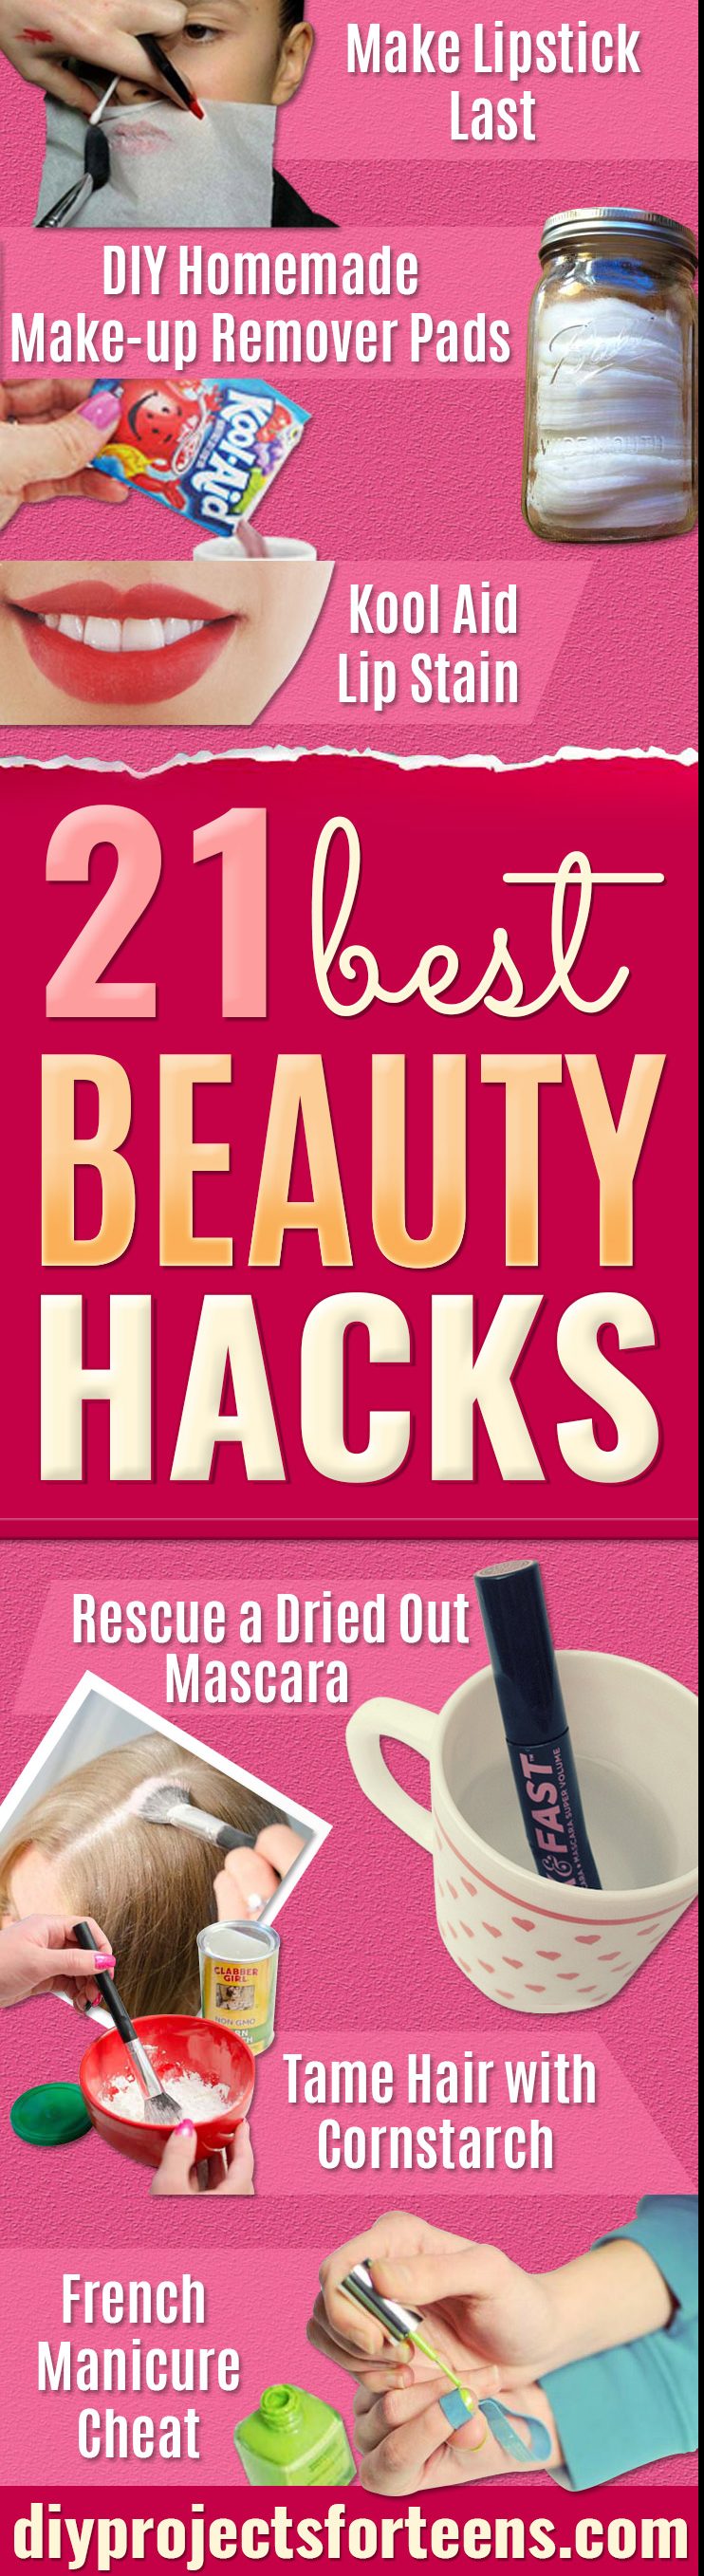 Best Beauty Hacks - Easy Makeup Tutorials and Makeup Ideas for Teens, Beginners, Women, Teenagers - Cool Tips and Tricks for Mascara, Lipstick, Foundation, Hair, Blush, Eyeshadow, Eyebrows and Eyes - Step by Step Tutorials and How To #beautyhacks #beautyideas #makeuptutorial #makeuphakcs #makeup #hair #teens